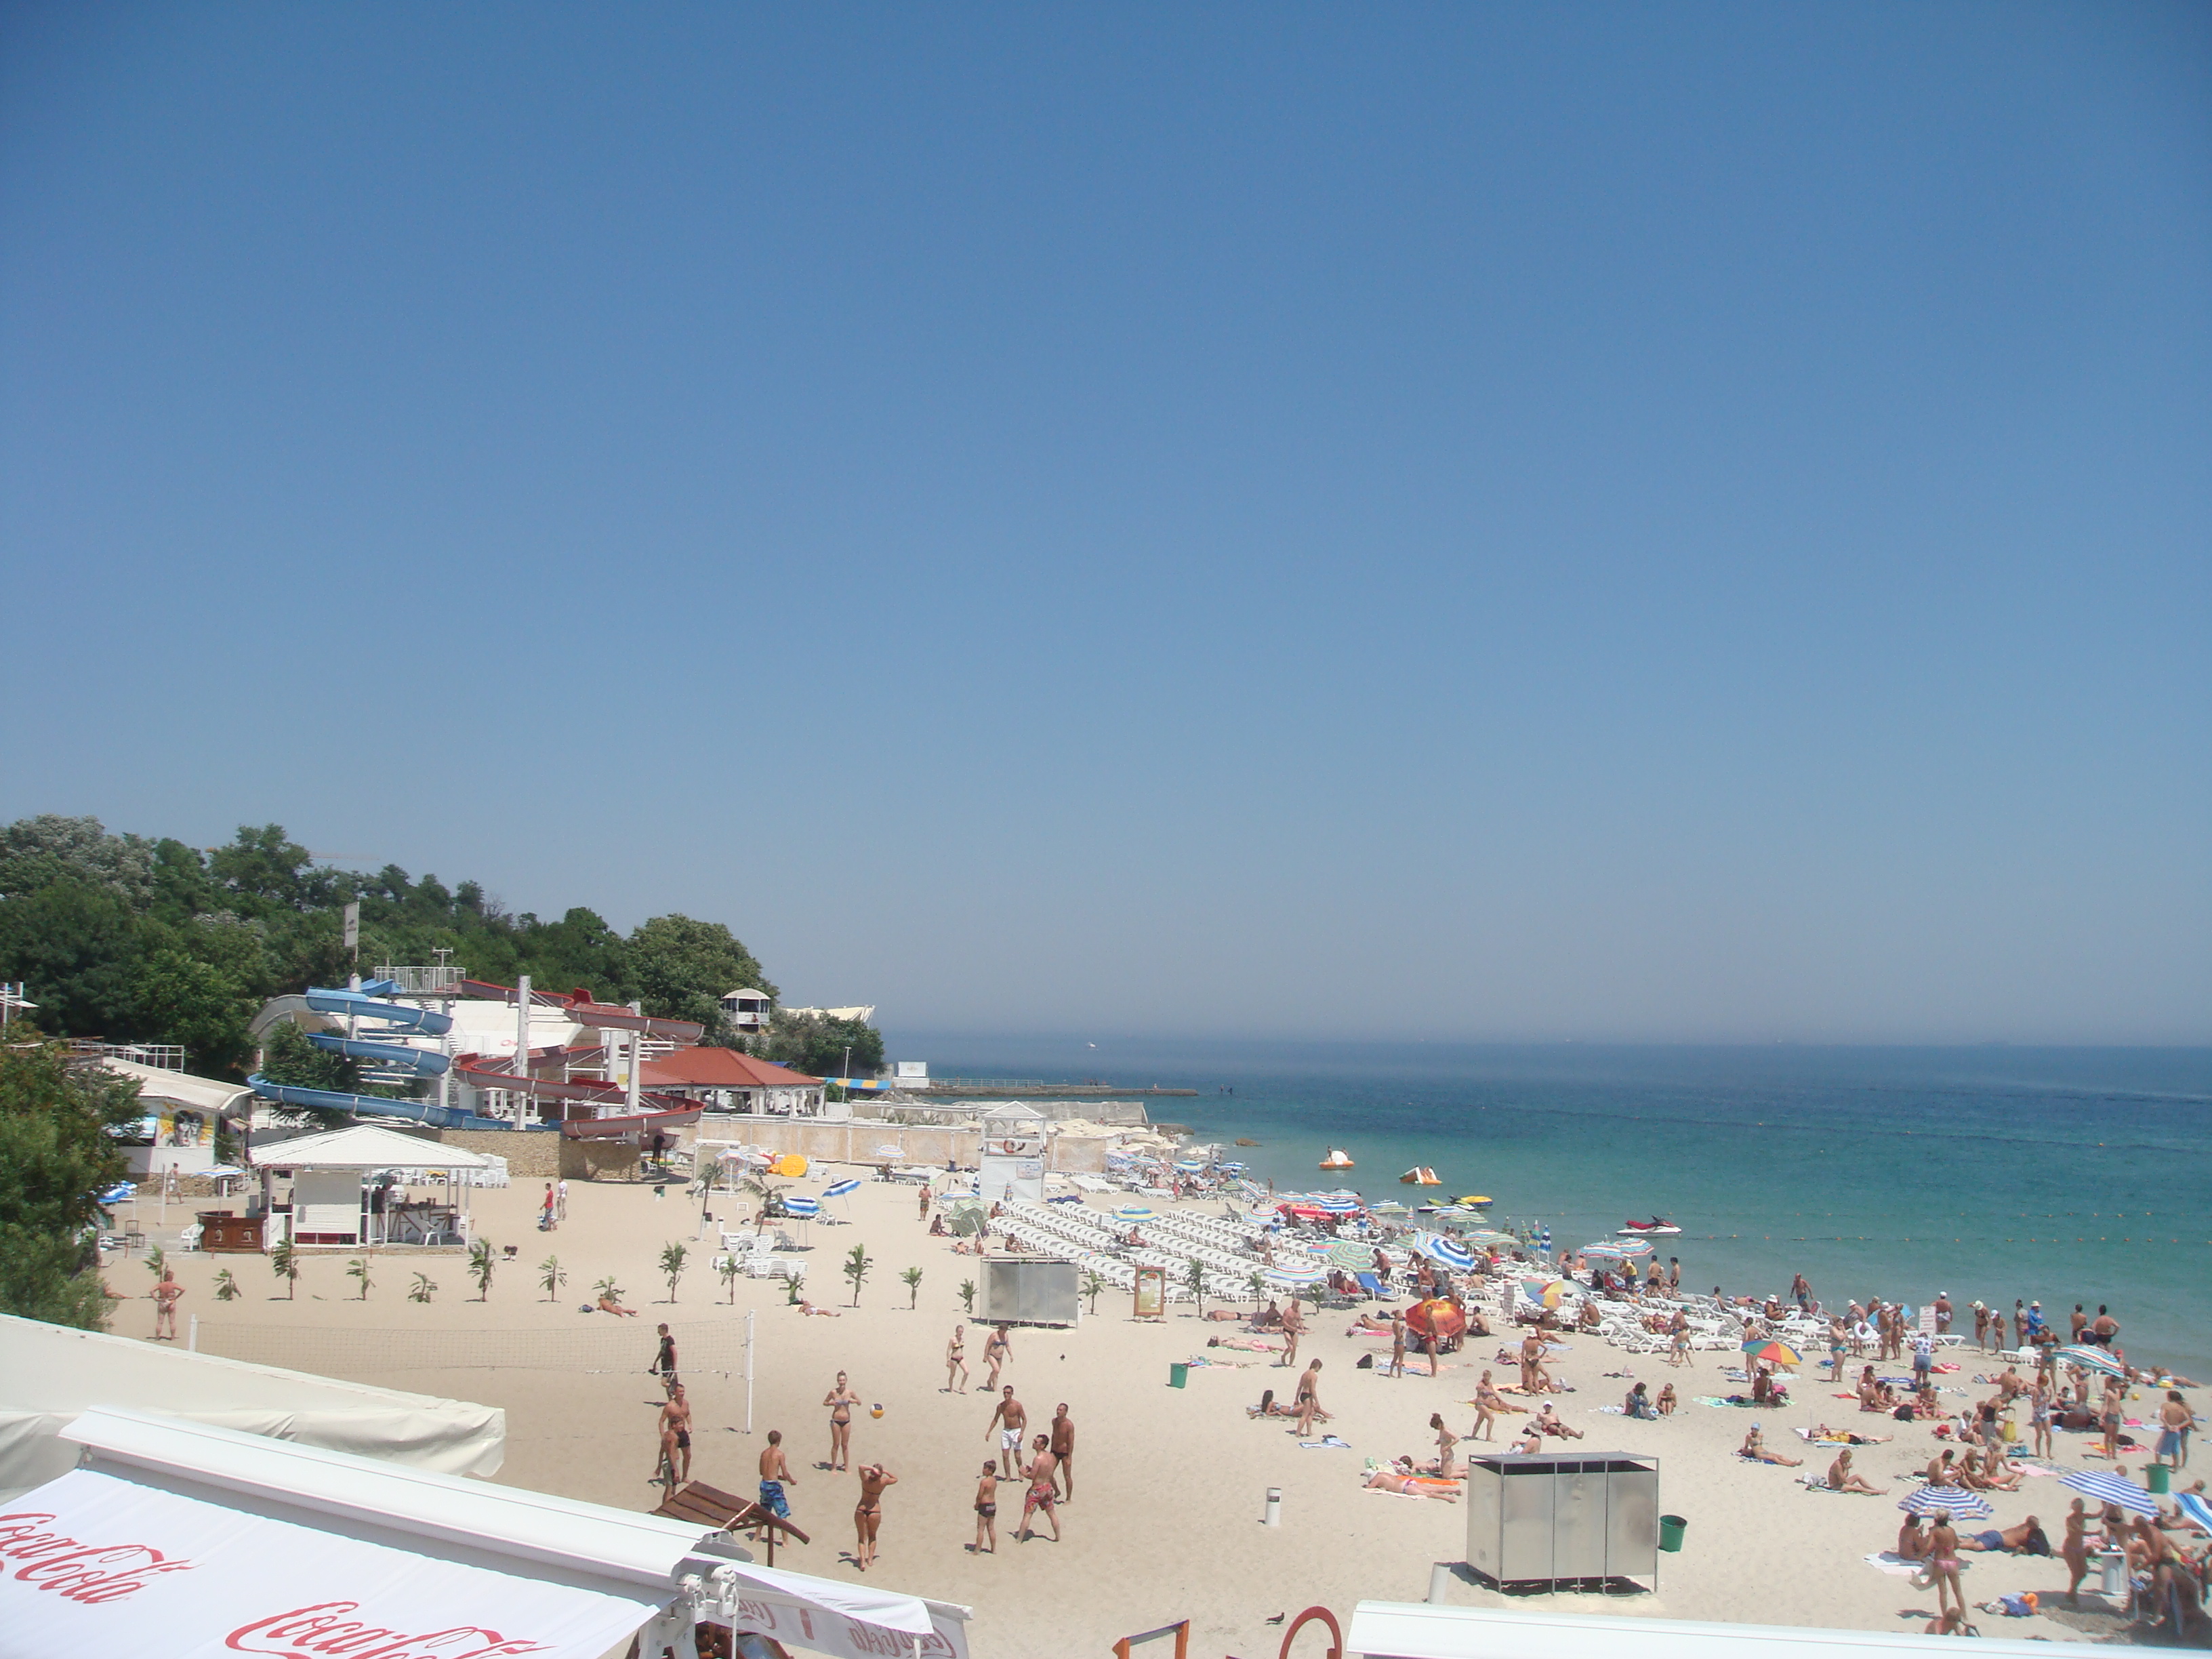 Beaches in Odessa, Ukraine are busy - You gotta see this!